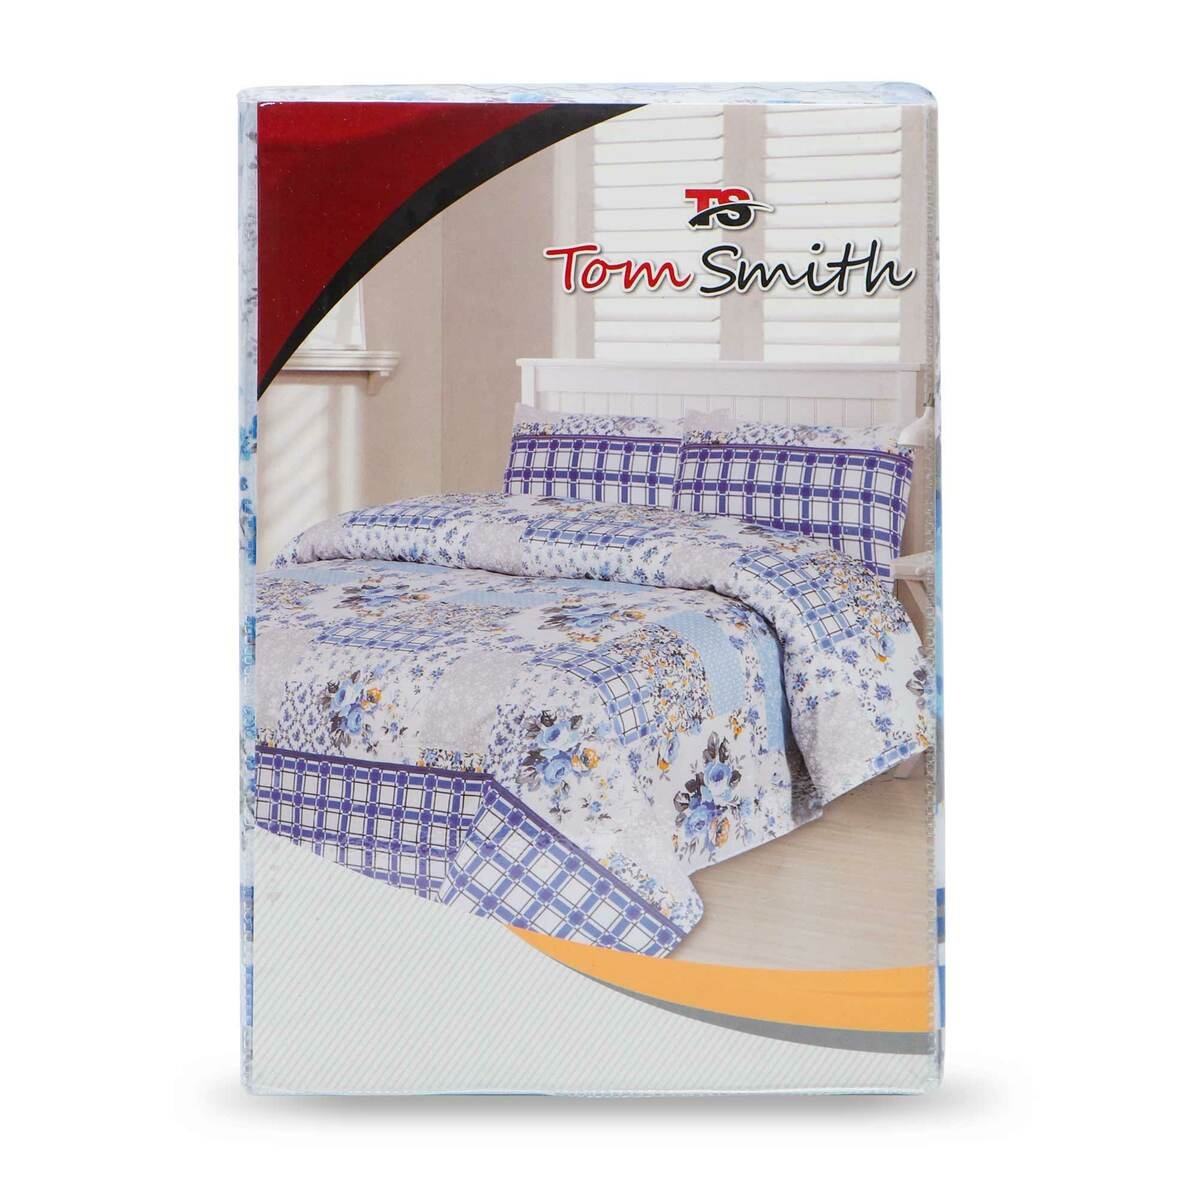 Tom Smith Bed Sheet Size: 150x240cm + Pillow Cover Blue